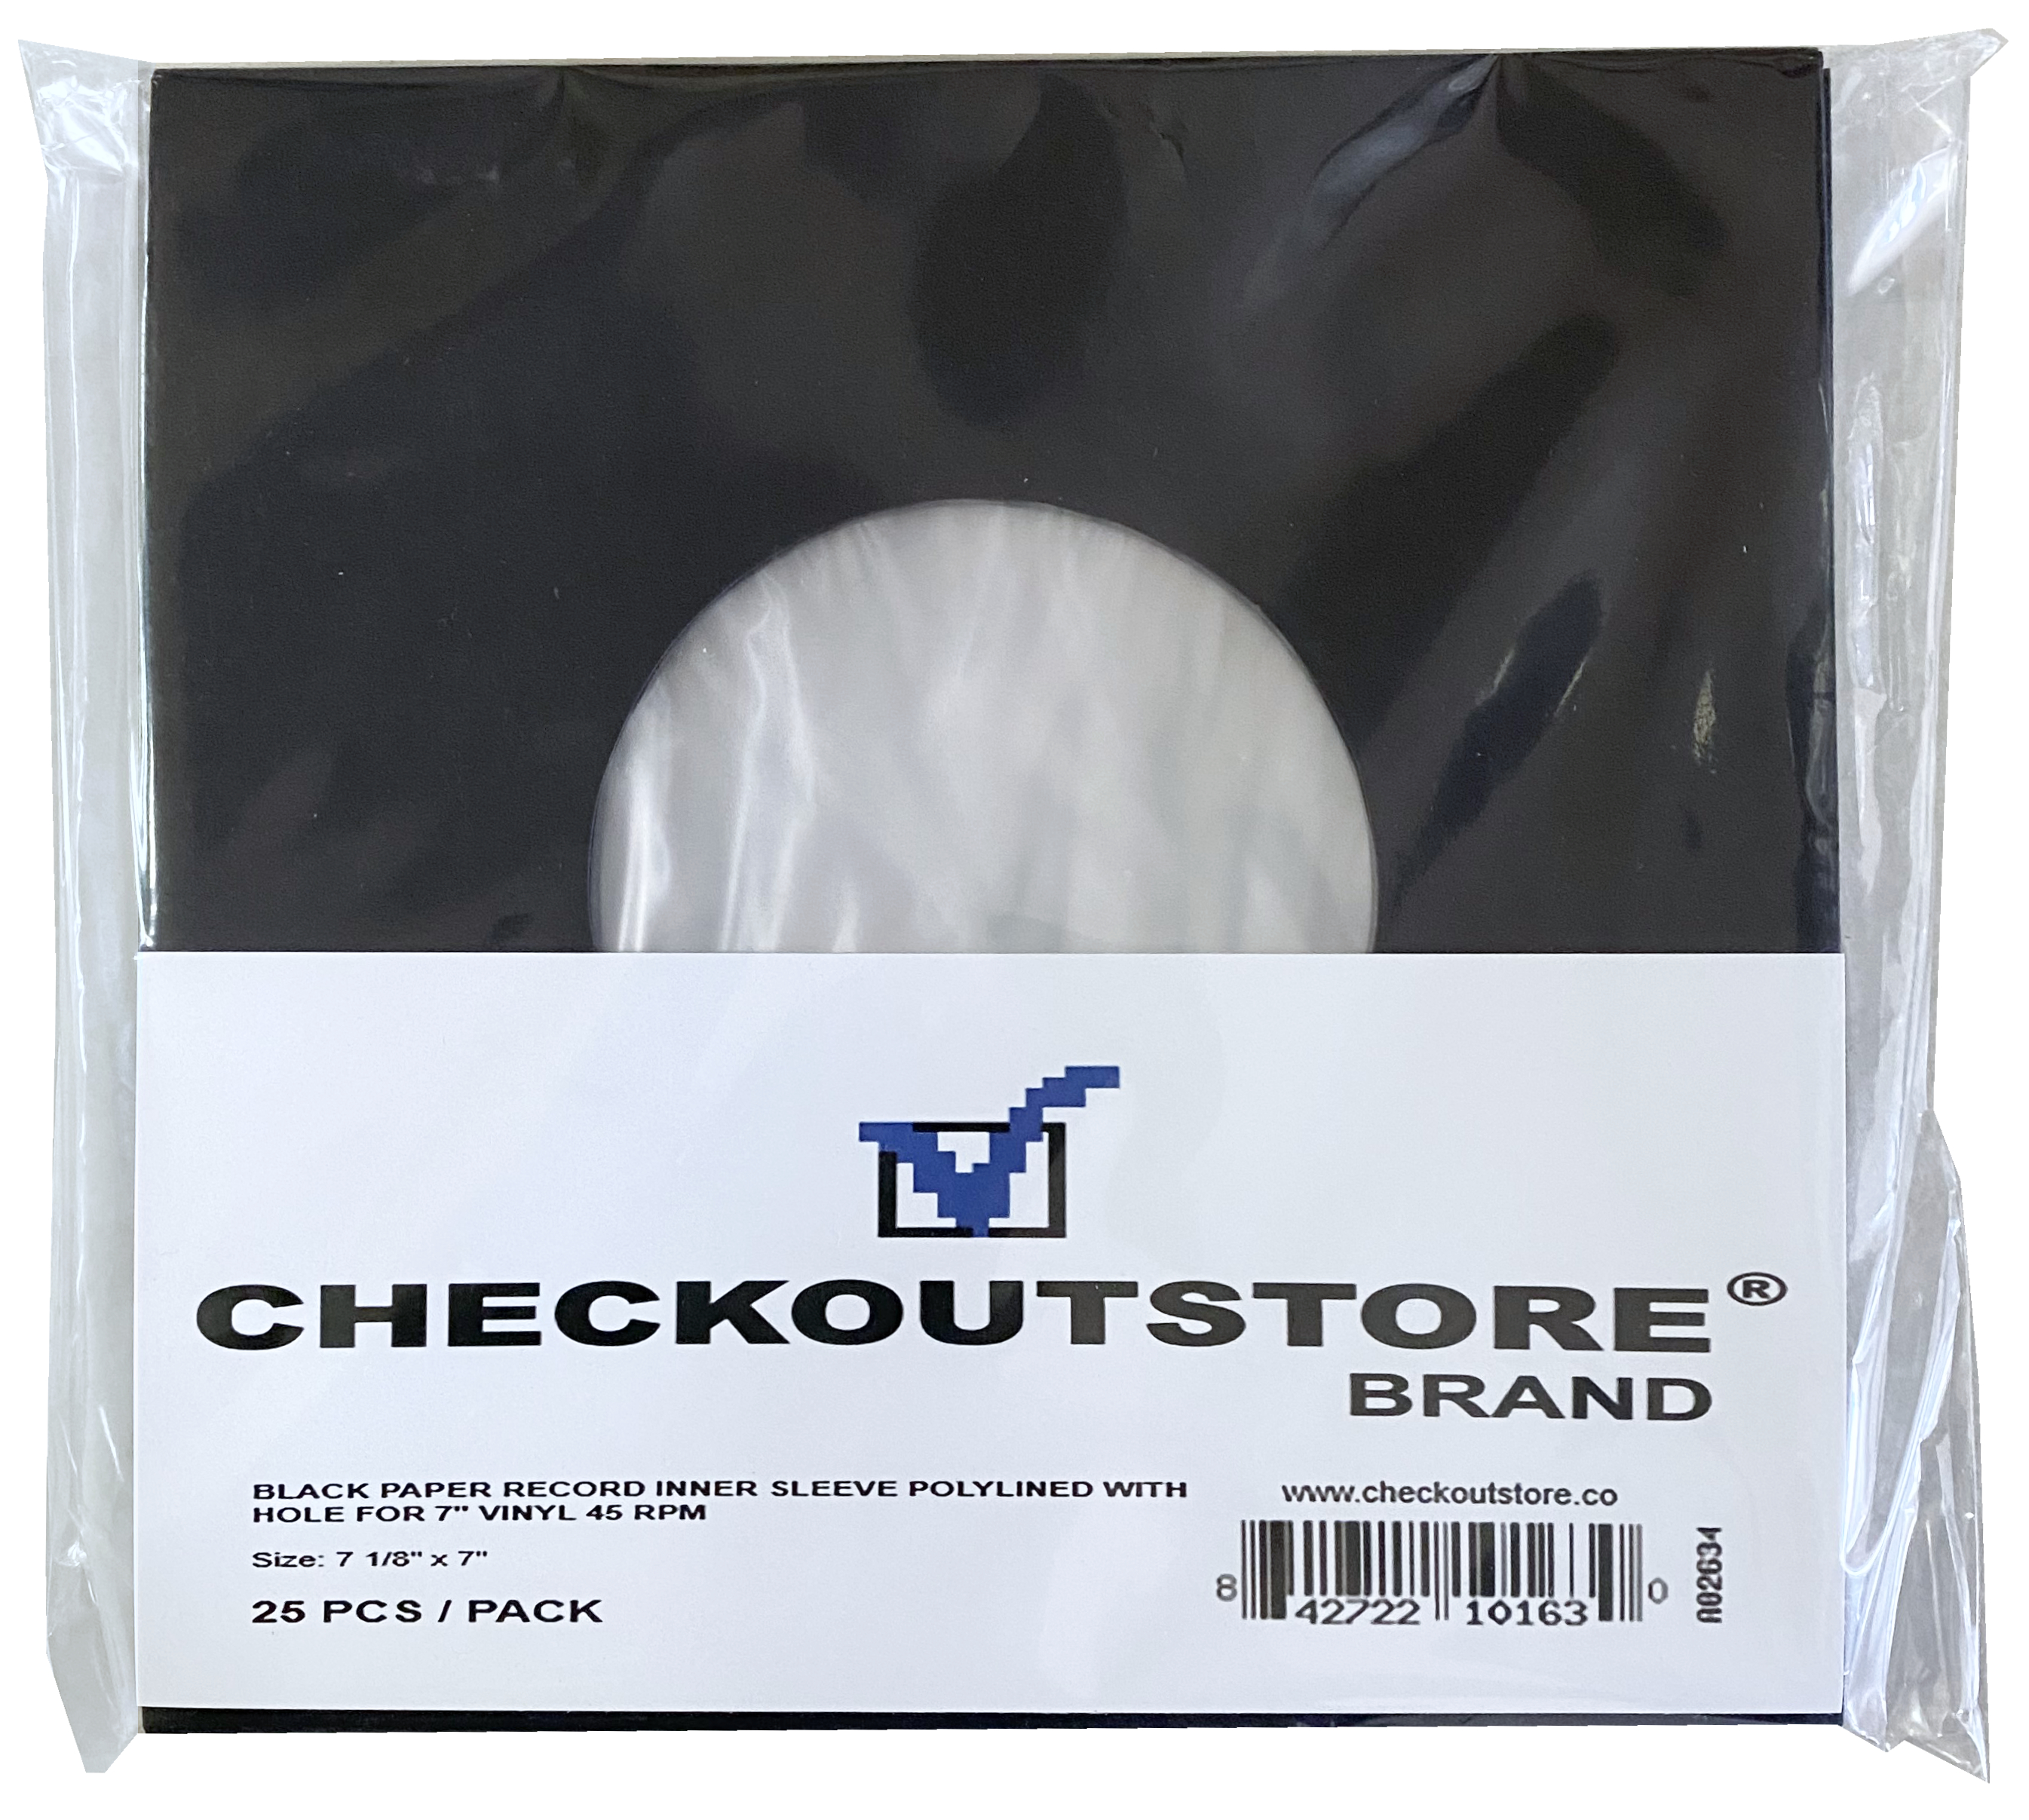 CheckOutStore 100 CheckOutStore Black Paper Record Sleeves Polylined With Hole for 7" Vinyl 45 RPM Records (Inner Sleeves)